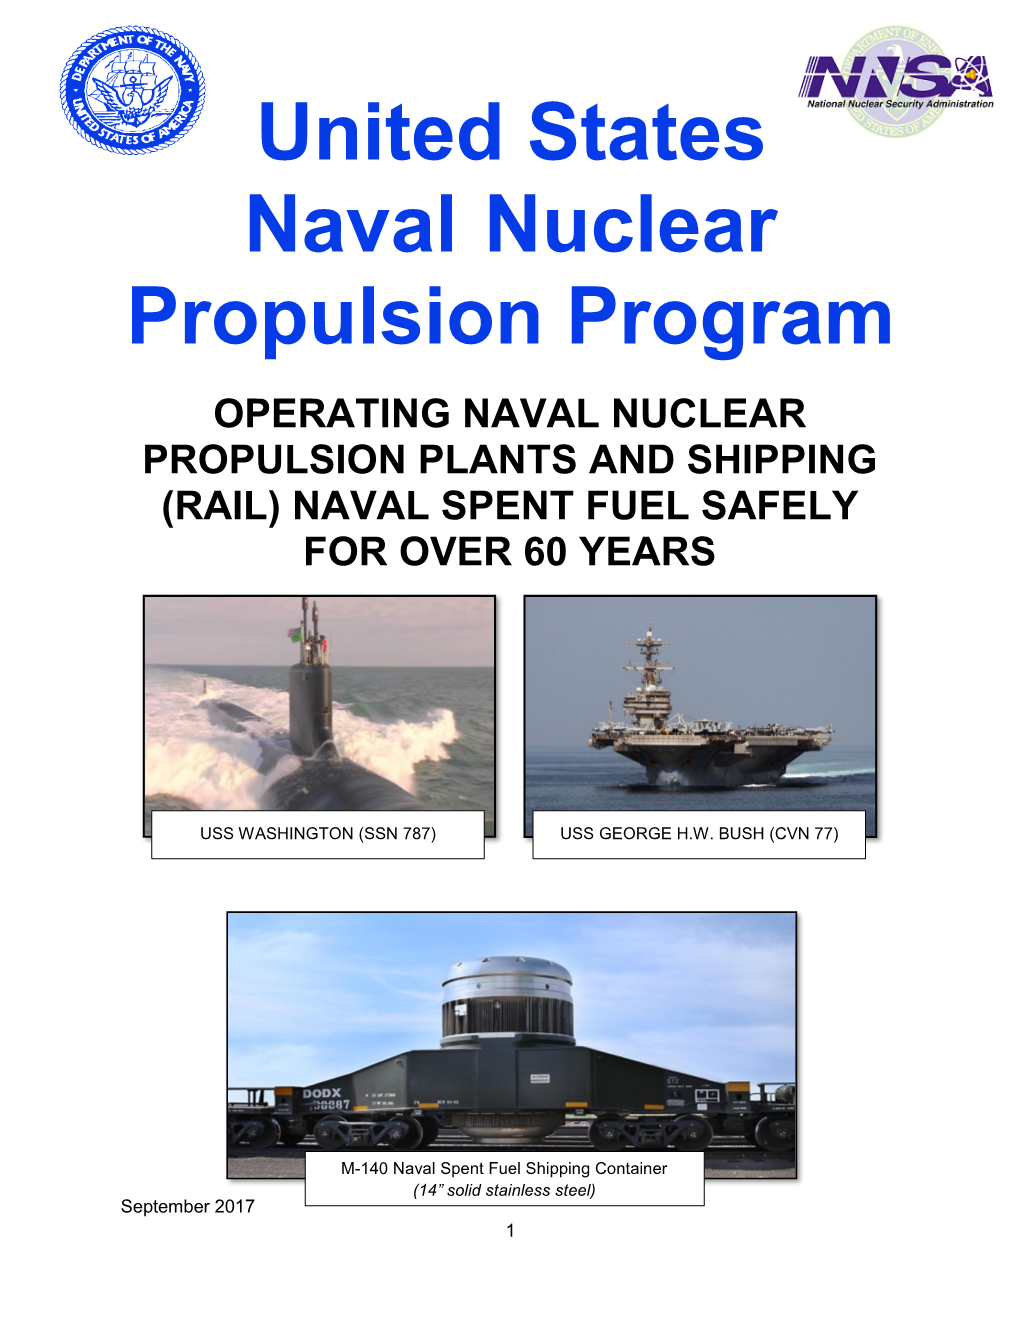 United States Naval Nuclear Propulsion Program